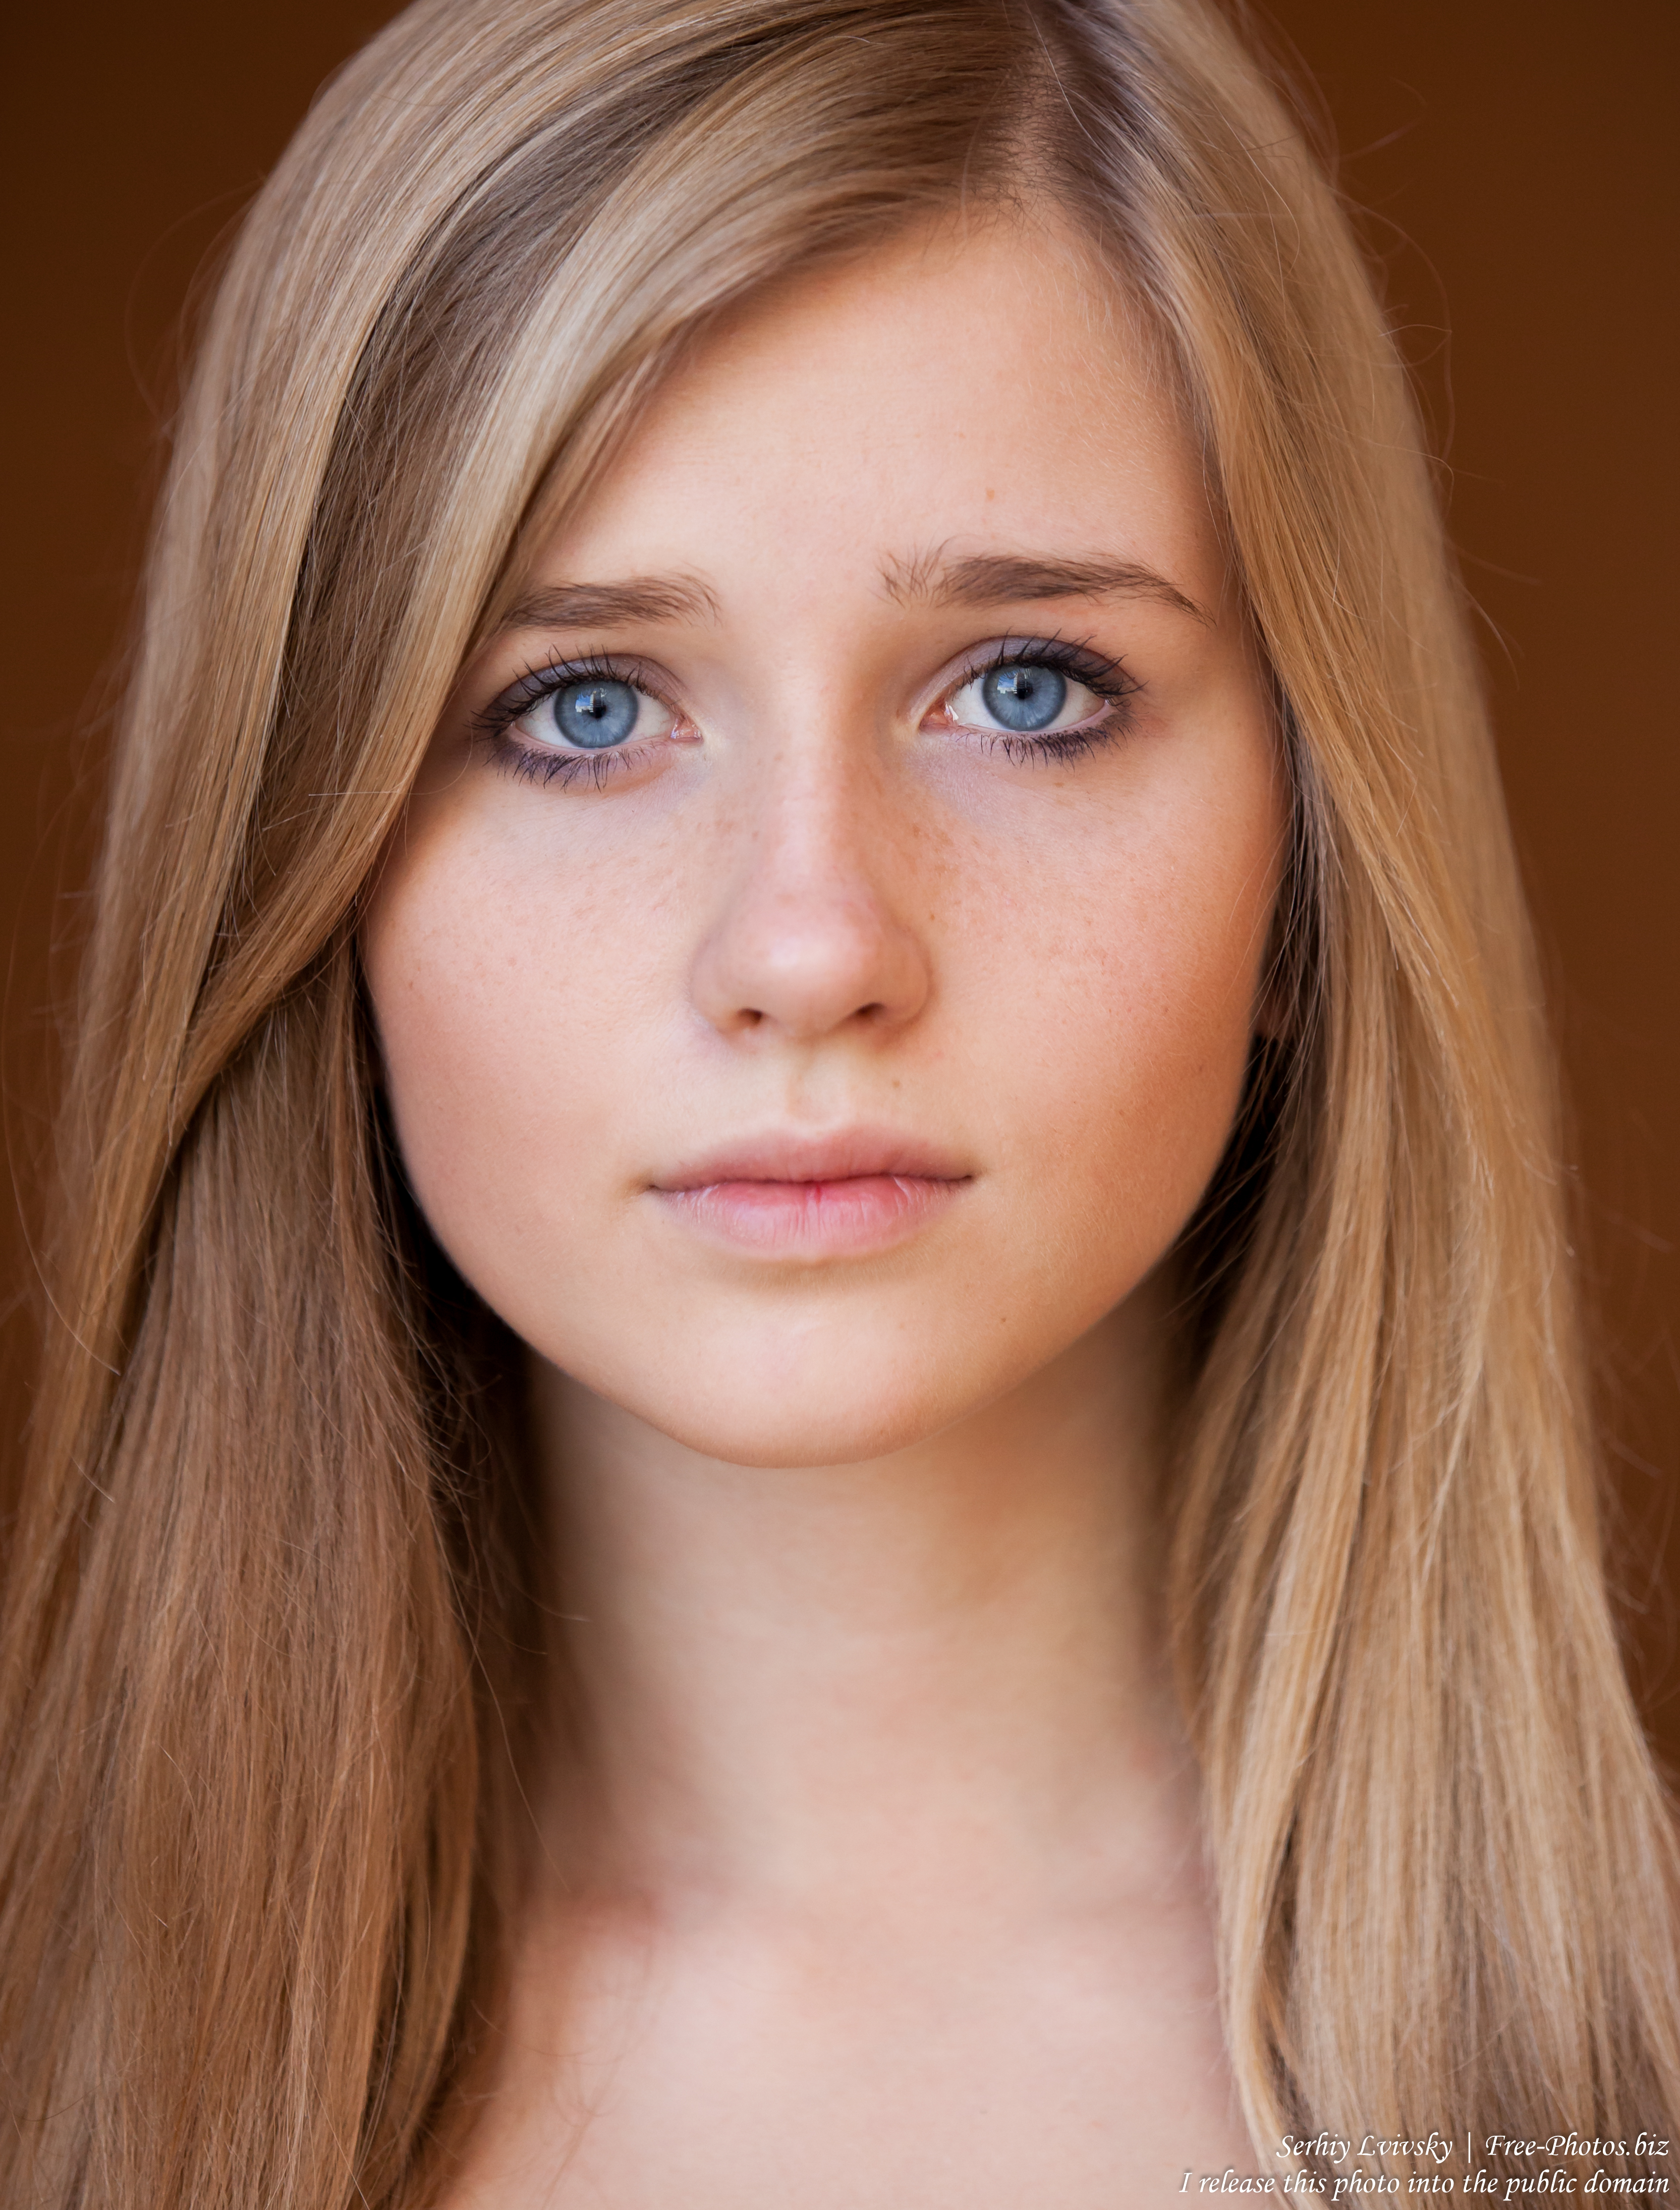 a 17-year-old natural blond girl with blue eyes photographed in October 2015 by Serhiy Lvivsky, picture 4